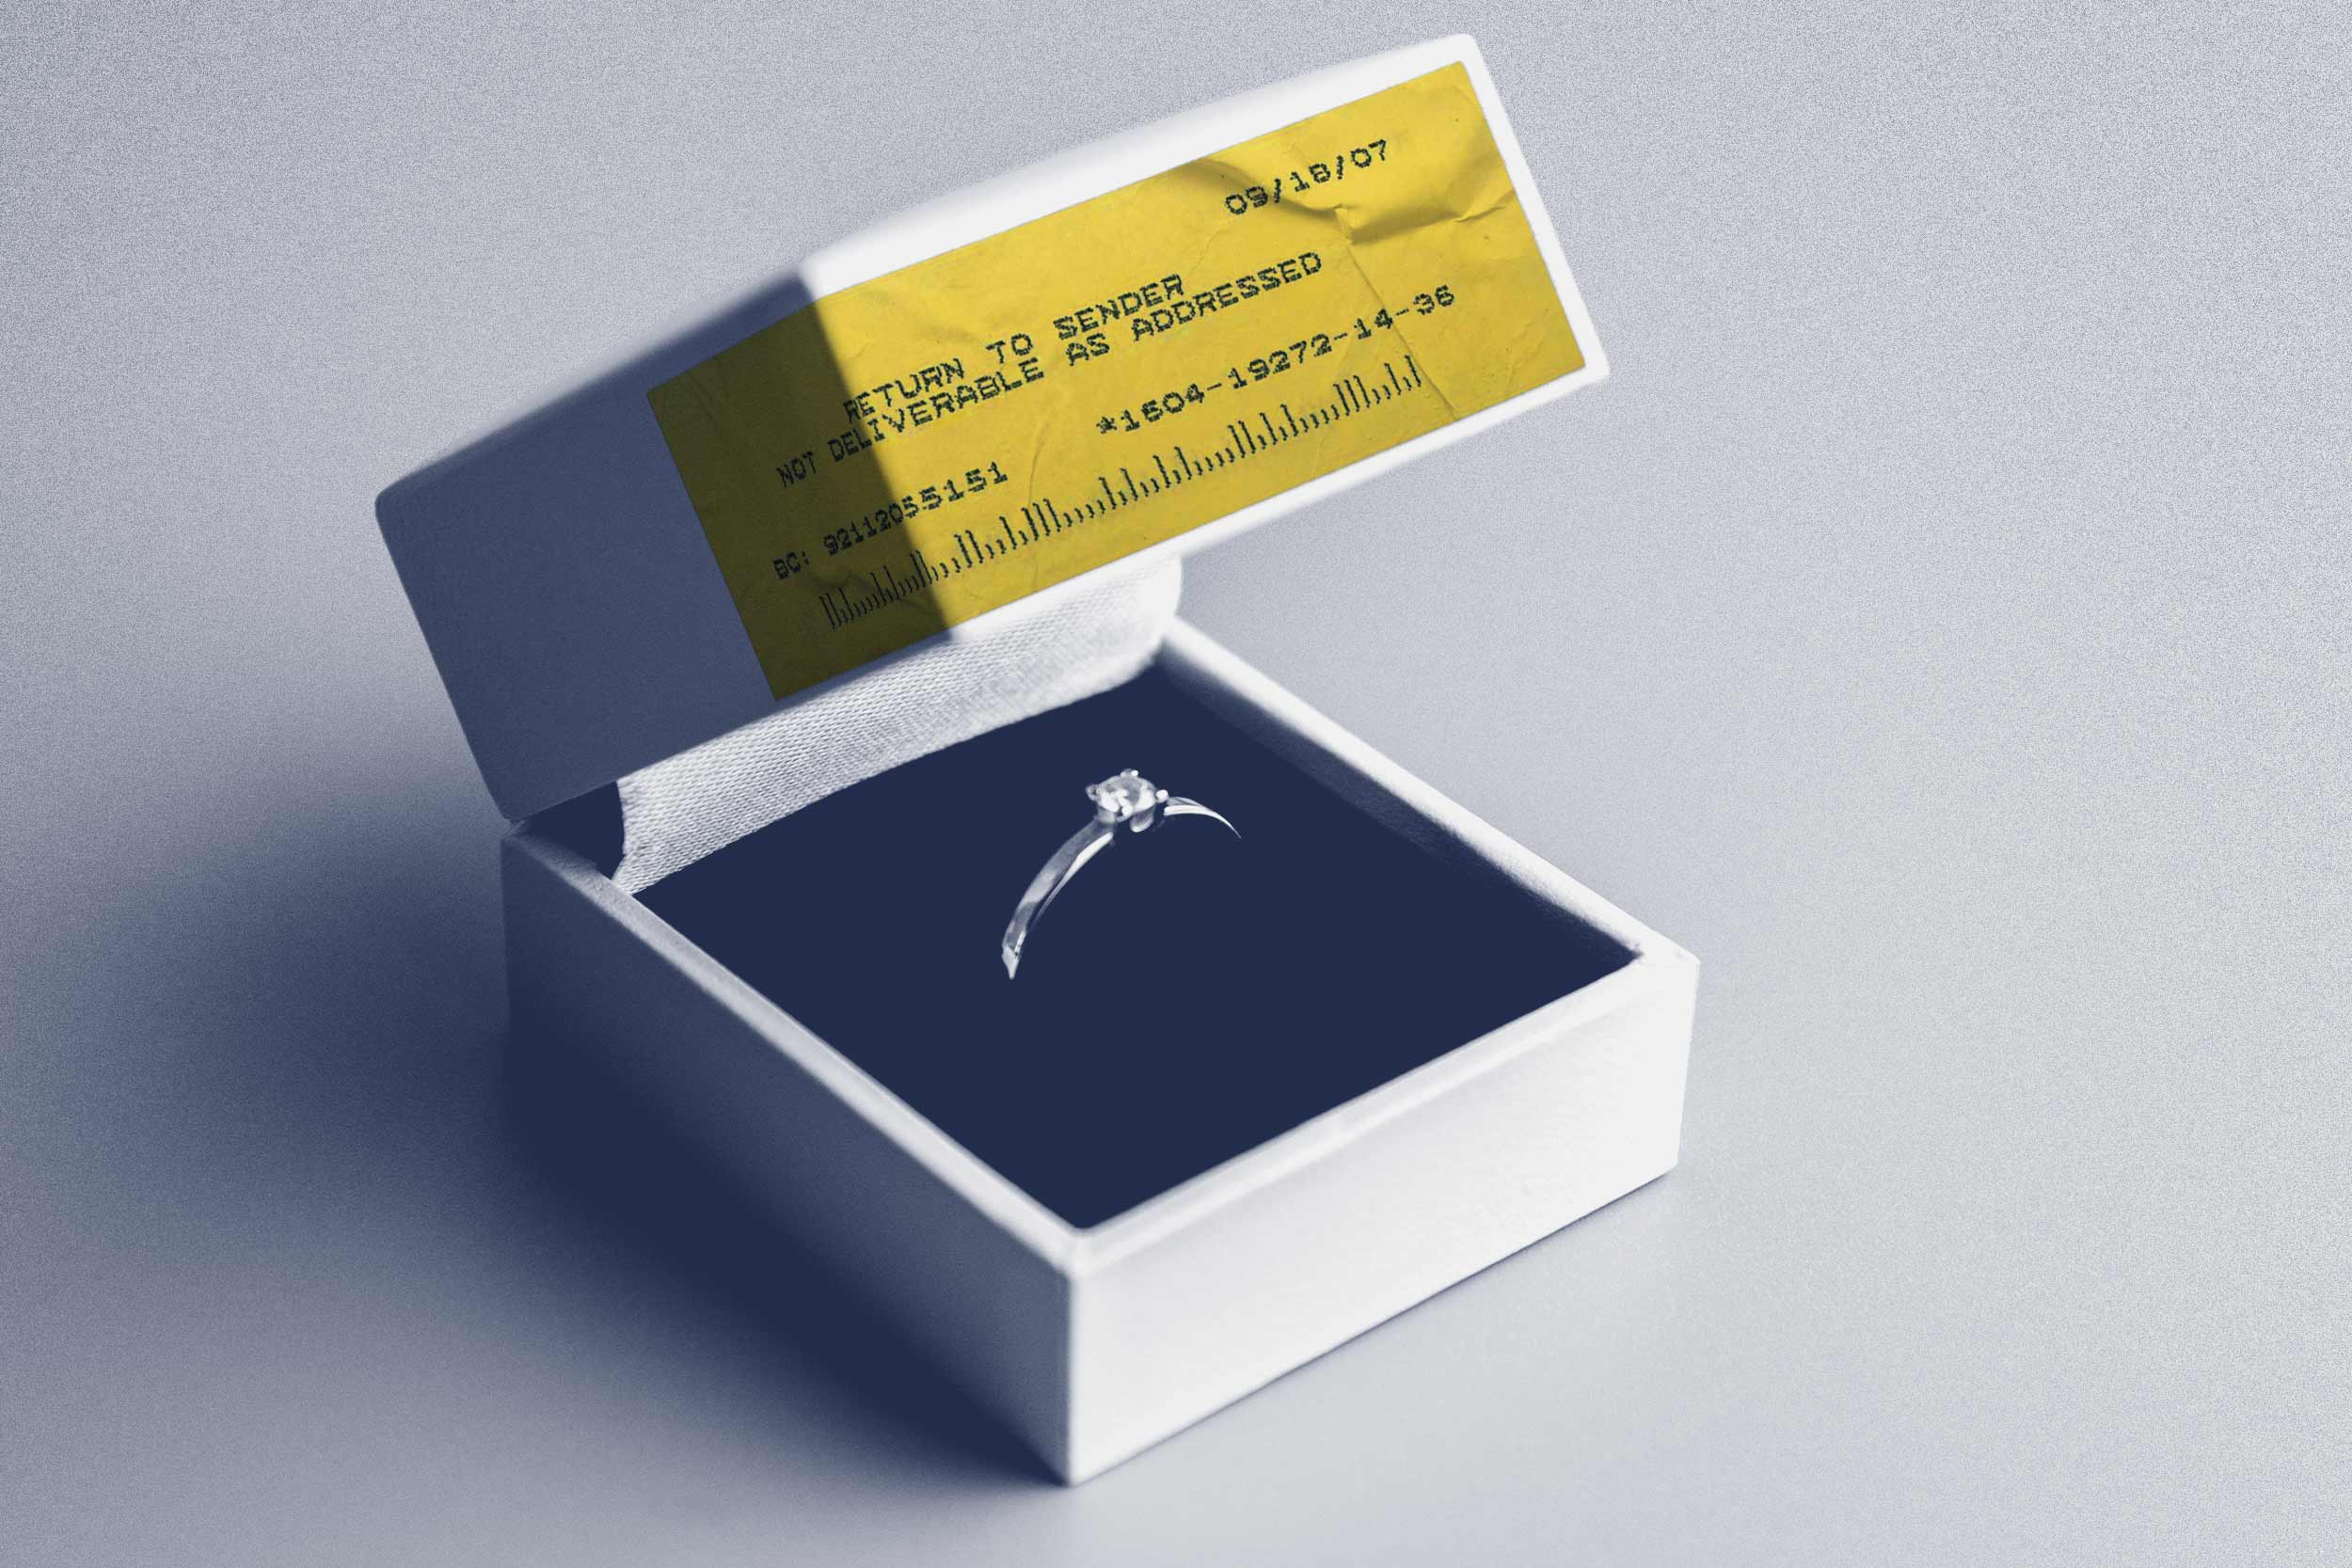 Illustration of an engagement ring in a box with a return to sender lable